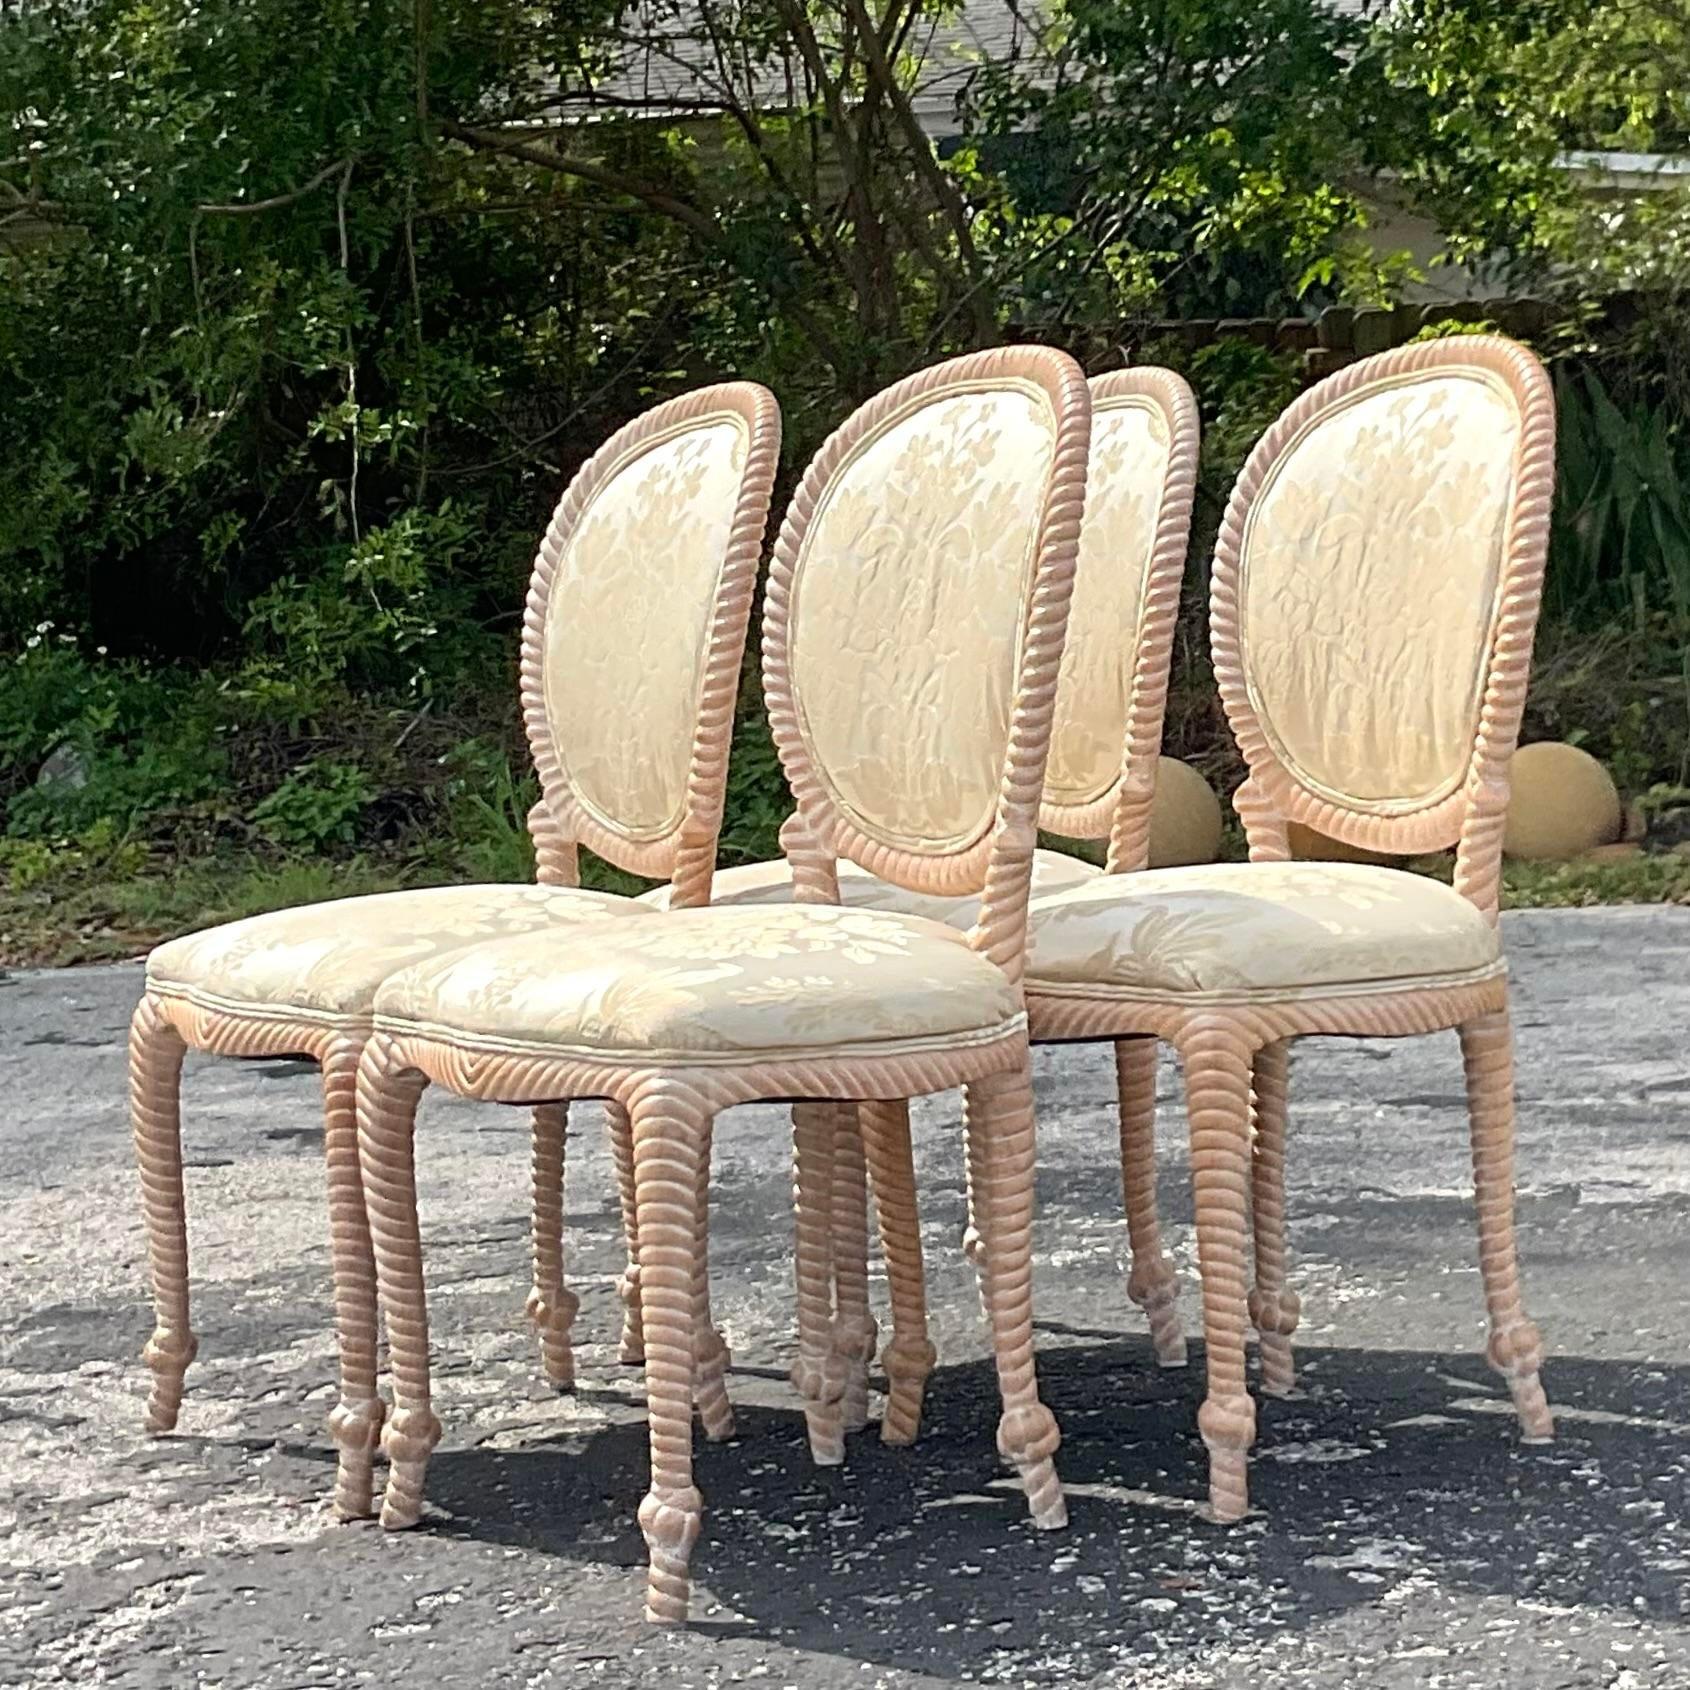 Vintage Coastal Carved Rope Dining Chairs - Set of 4 In Good Condition For Sale In west palm beach, FL